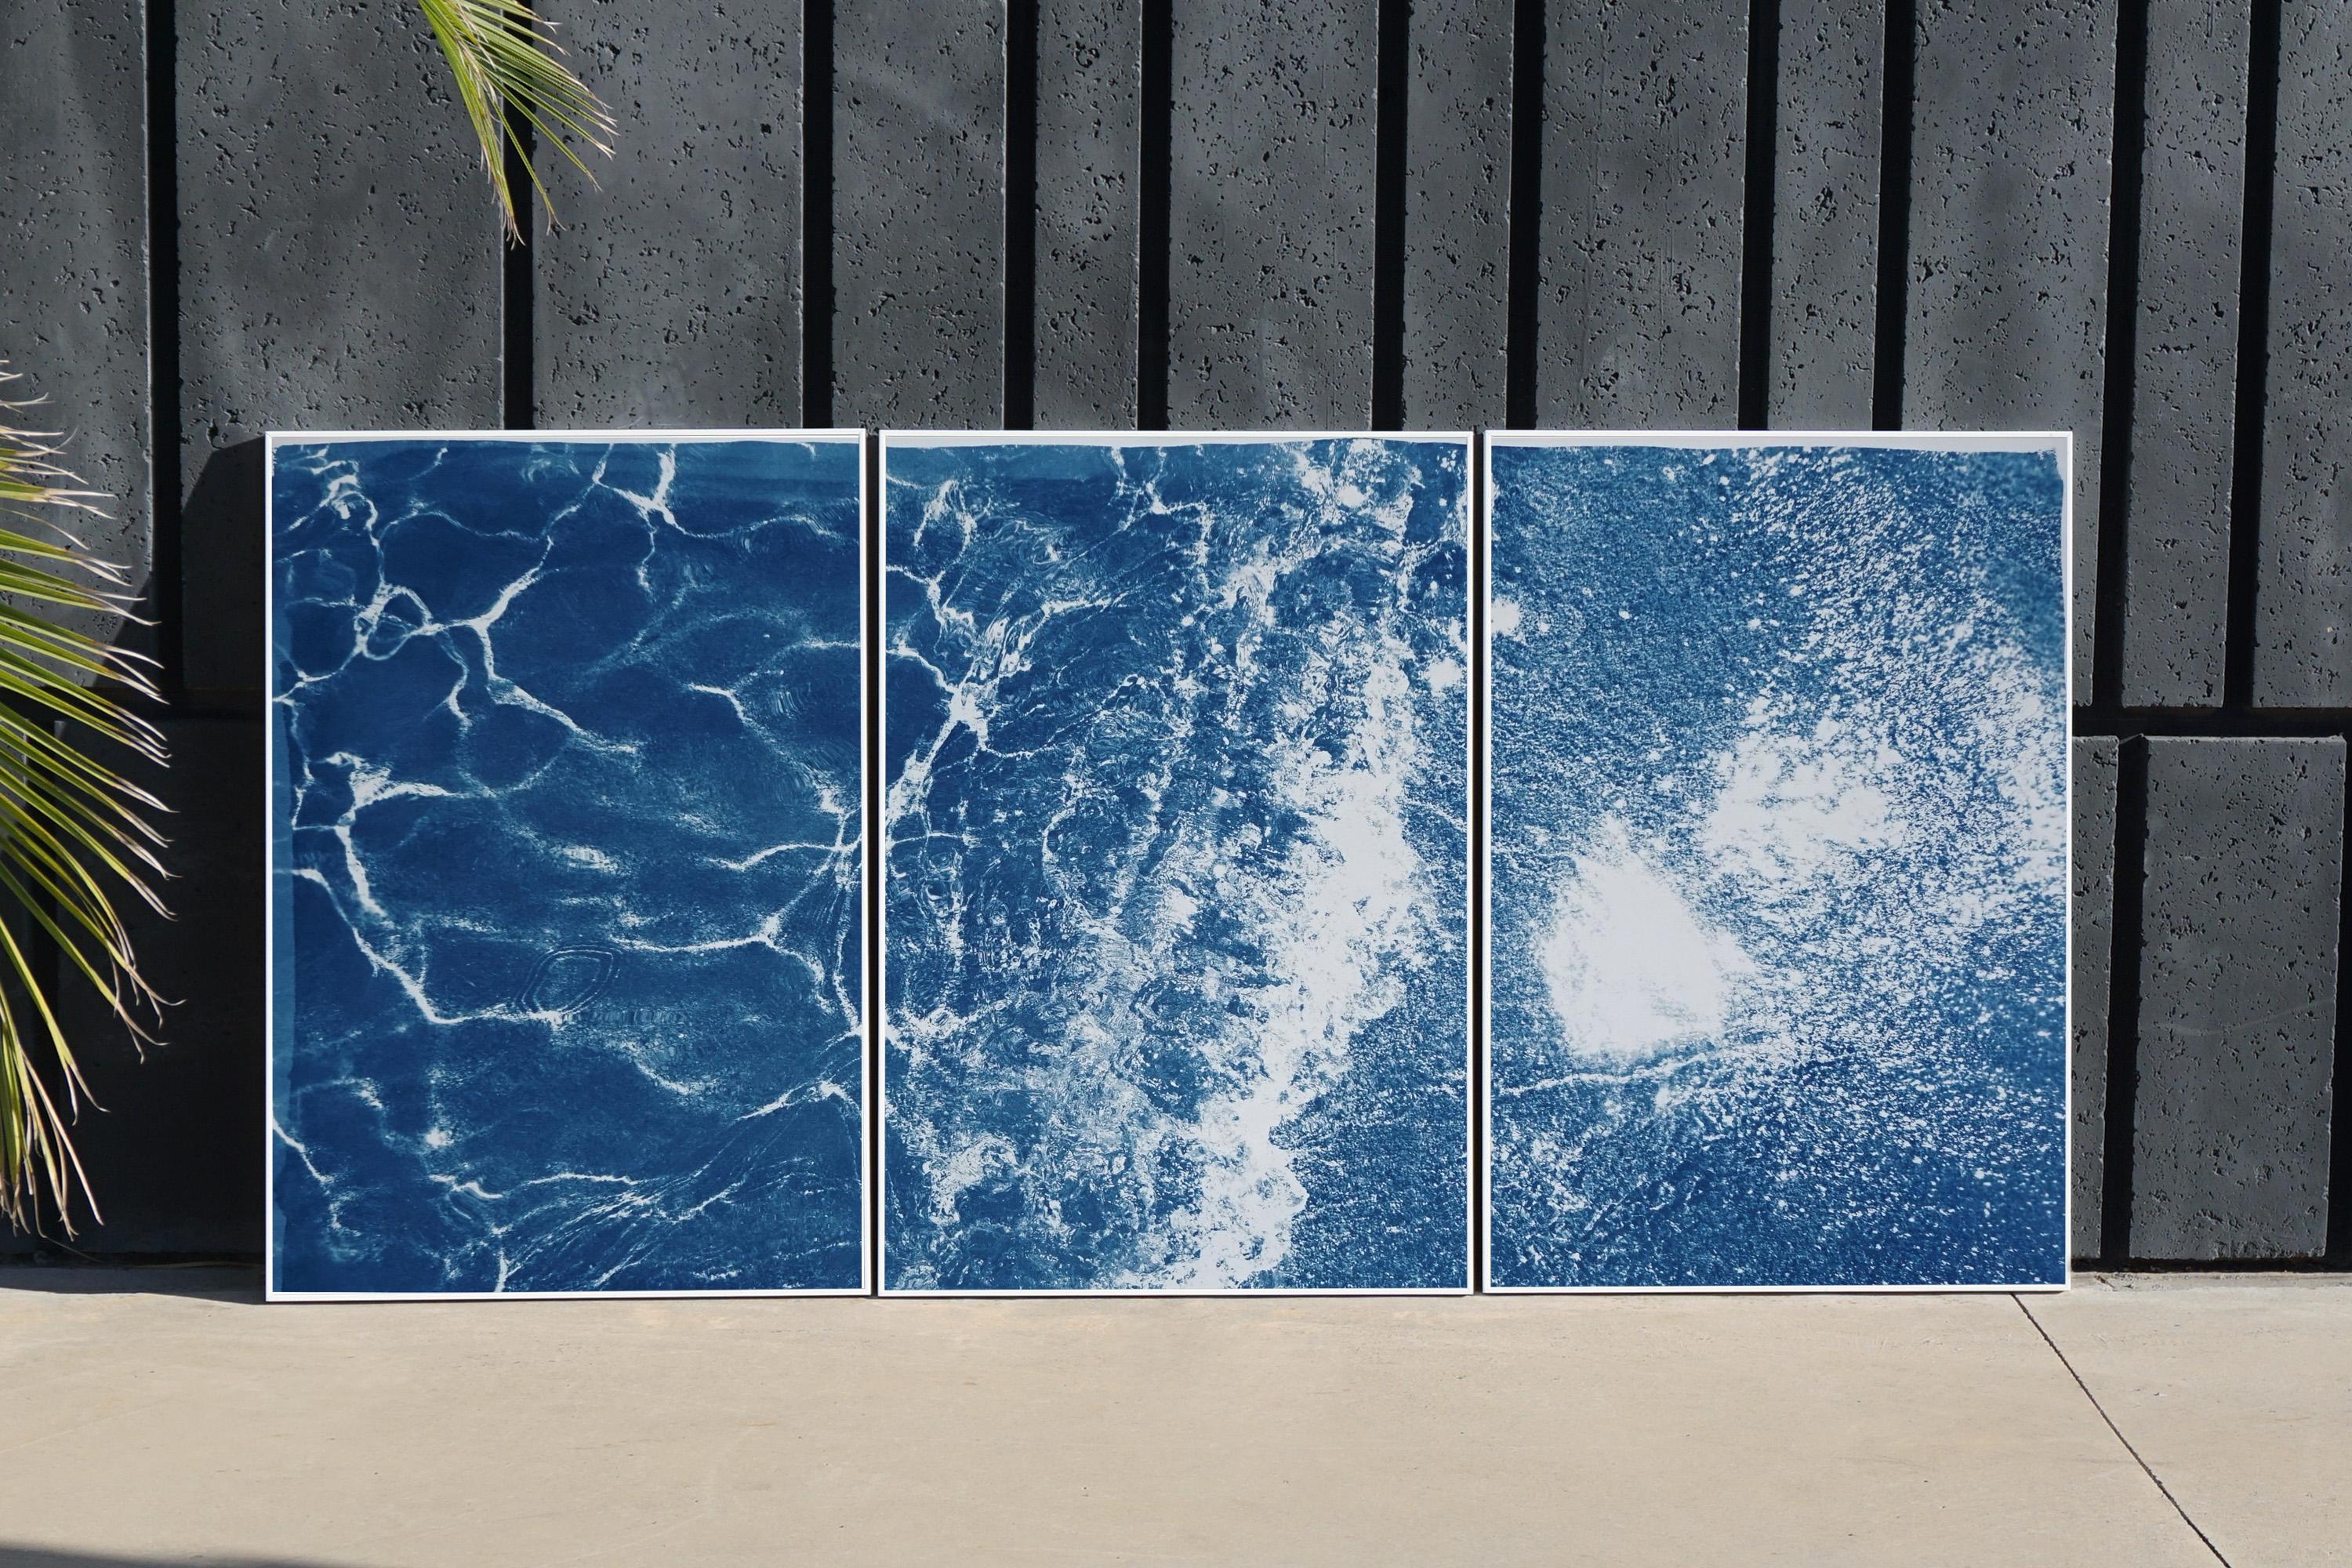 This is an exclusive handprinted limited edition cyanotype.

This beautiful triptych is called 